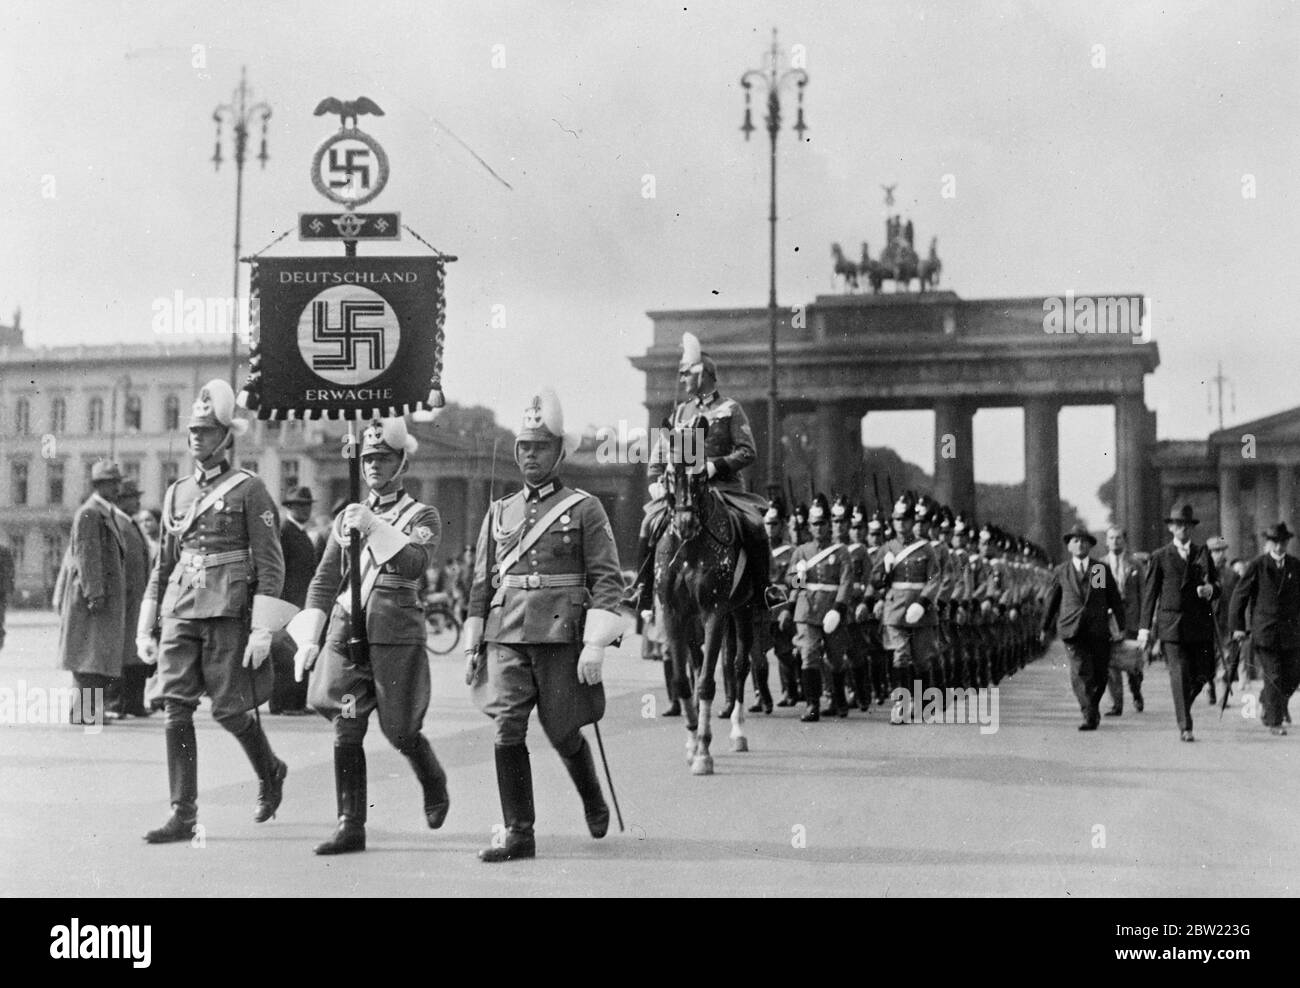 The police with the new standard at their head, marching through the Brandemburg Gate, Berlin. Smartly uniformed German police marched through Berlin, the new standard was presented to them by Herr Hitler himself. 16 September 1937. Stock Photo